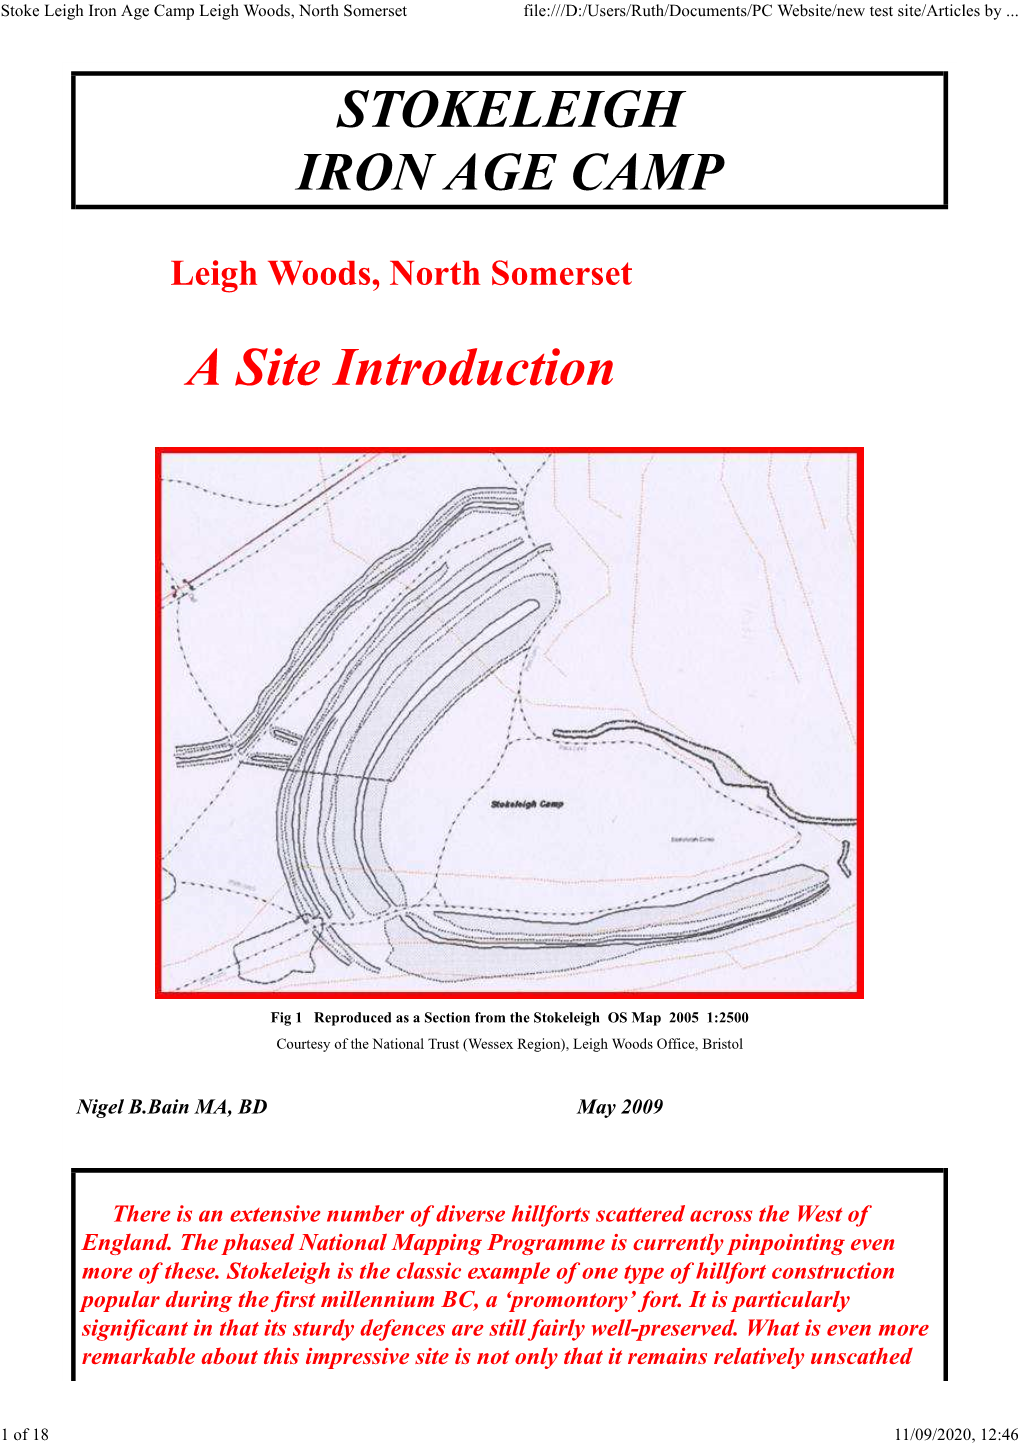 Stoke Leigh Iron Age Camp Leigh Woods, North Somerset File:///D:/Users/Ruth/Documents/PC Website/New Test Site/Articles by